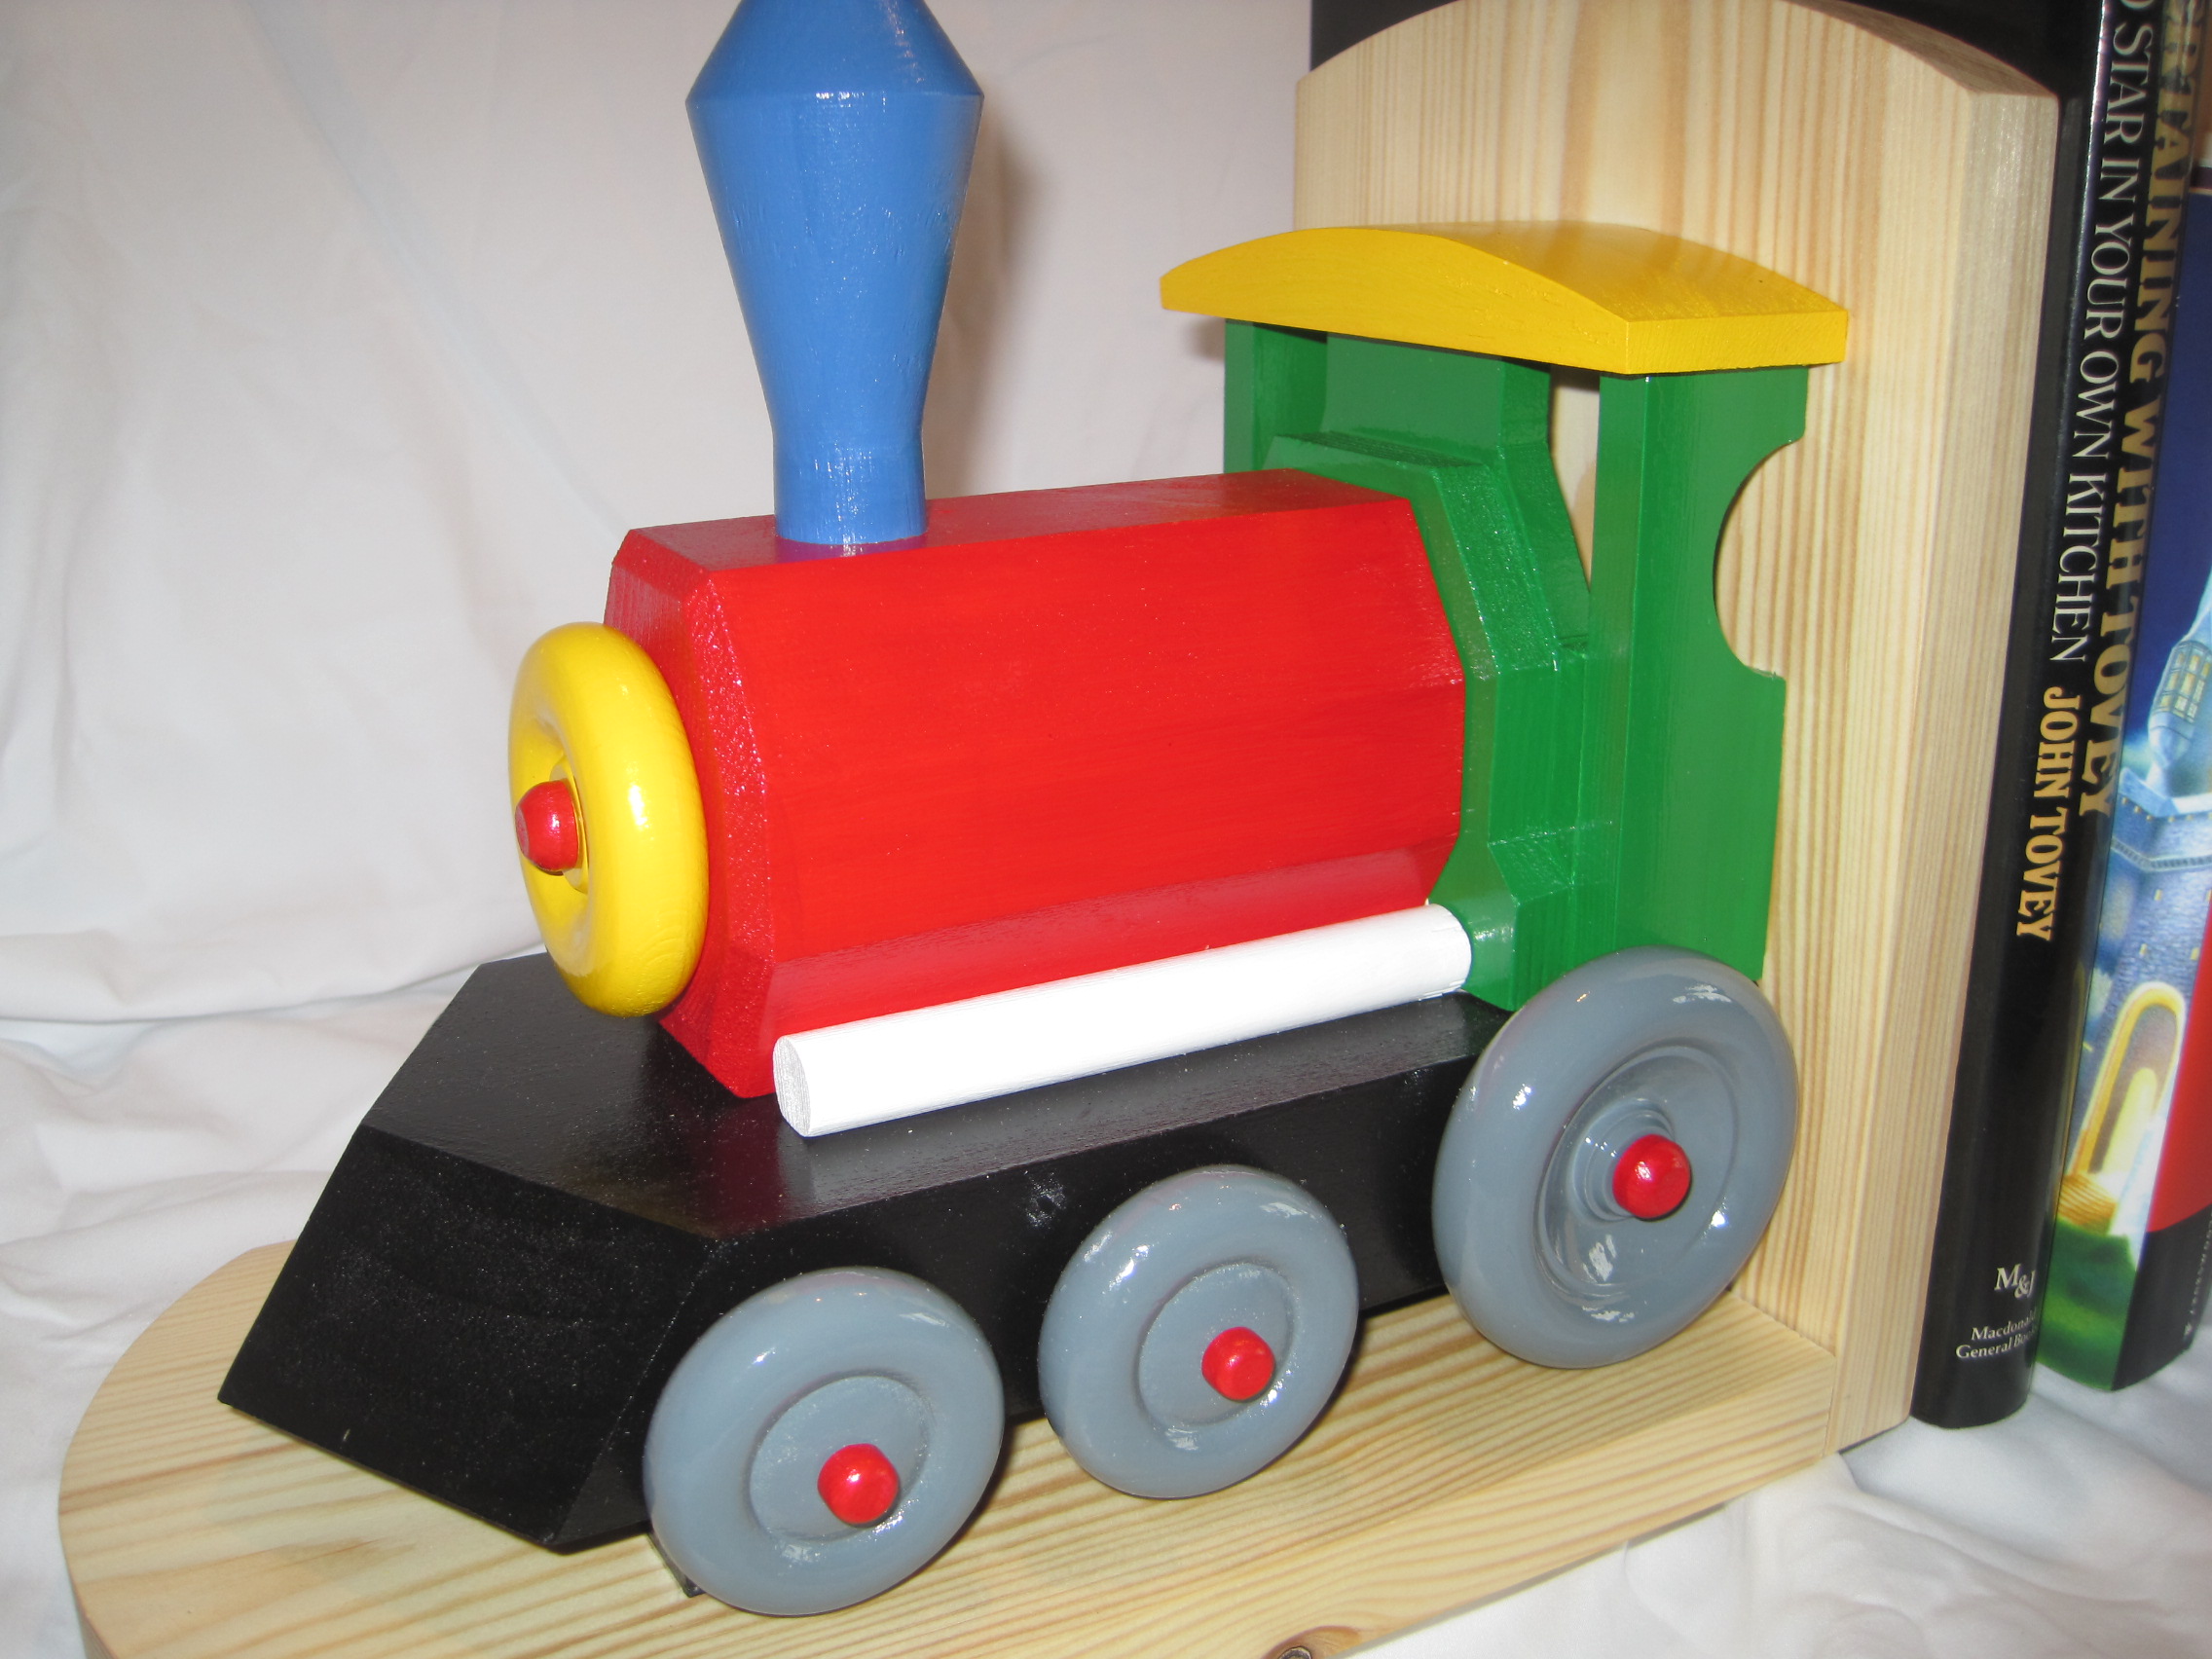 Childs wooden book stand